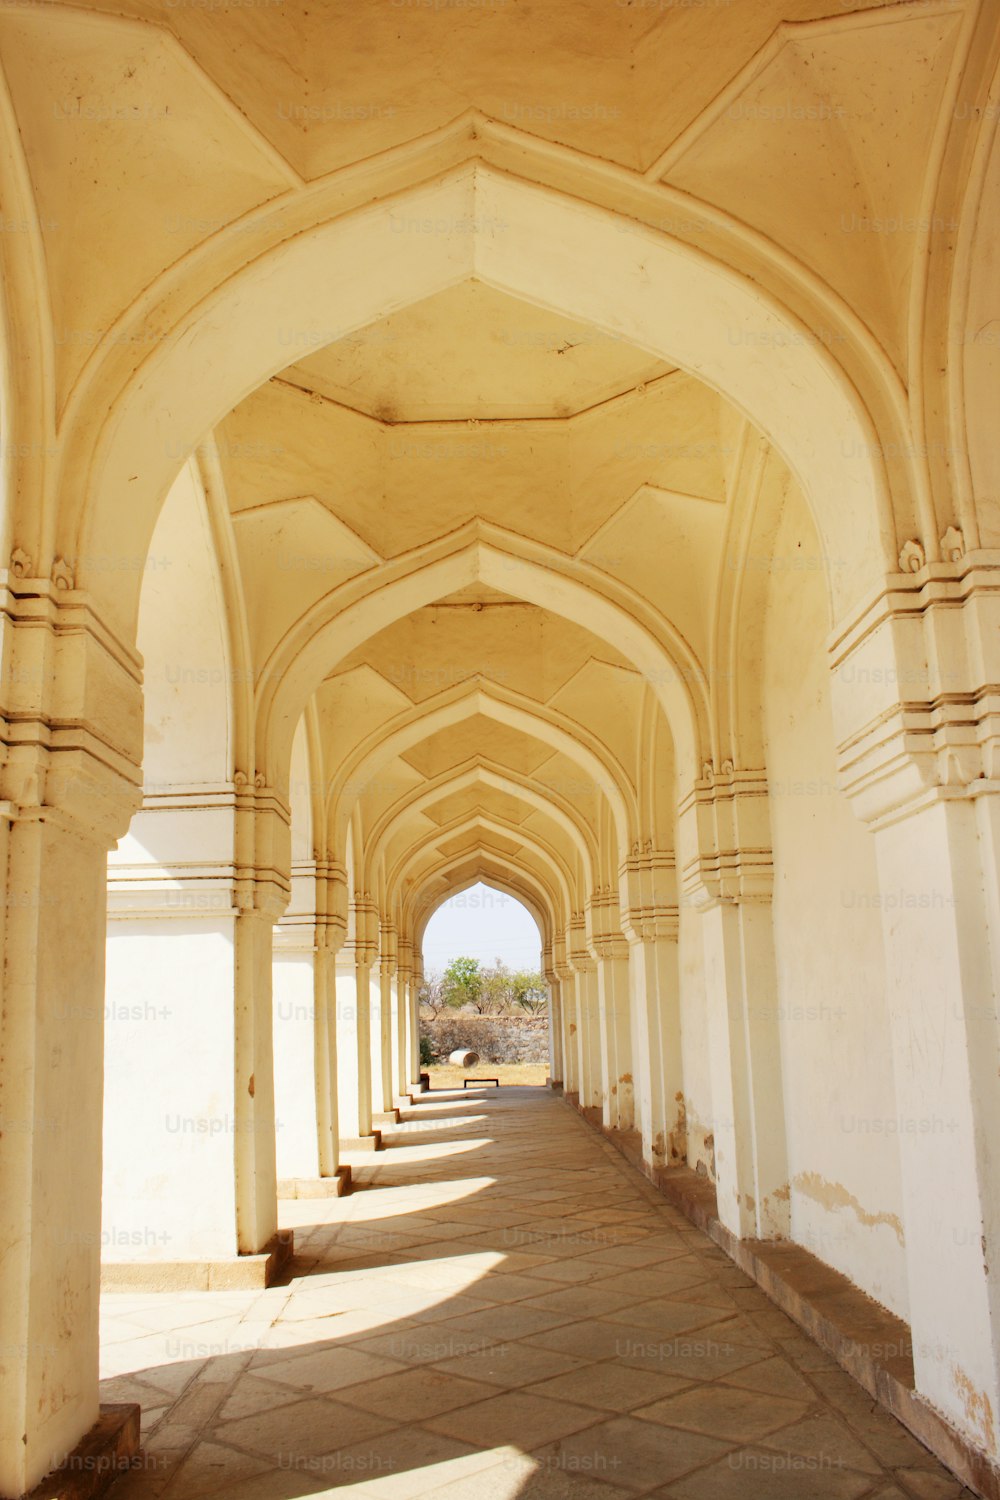 a walkway lined with arches and pillars in a building